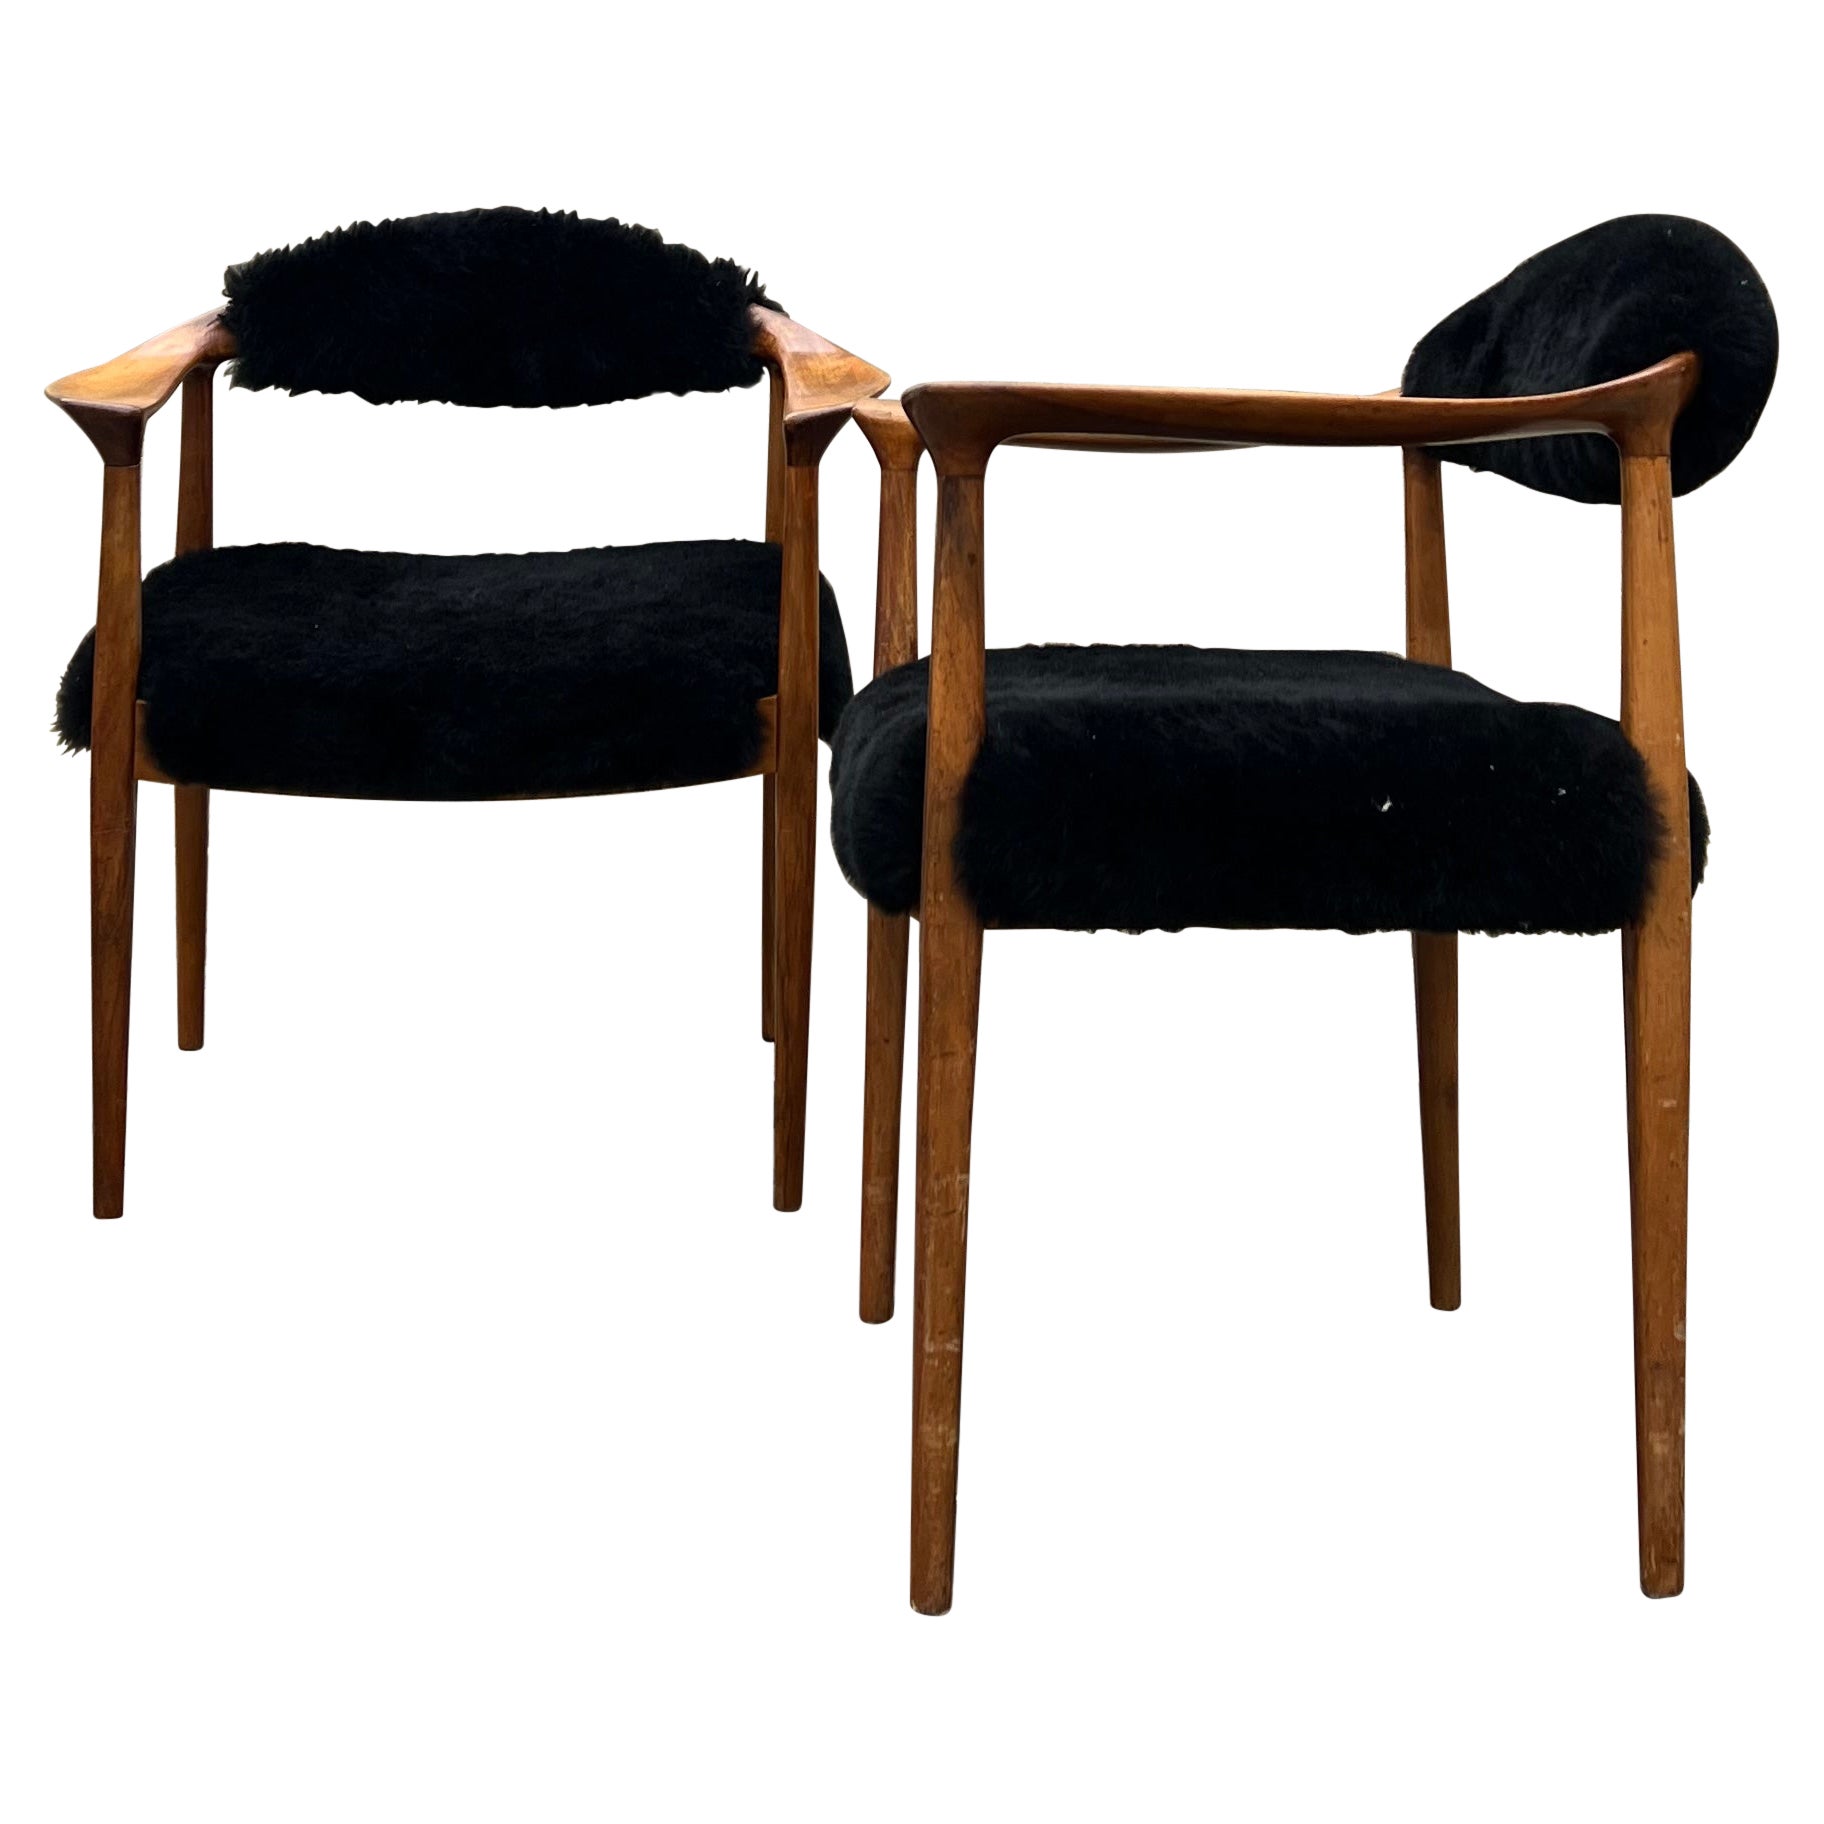 Pair of Teak Danish Armchairs, 1950s, Similar to H. Wegner, Jh 501, Round Chair For Sale